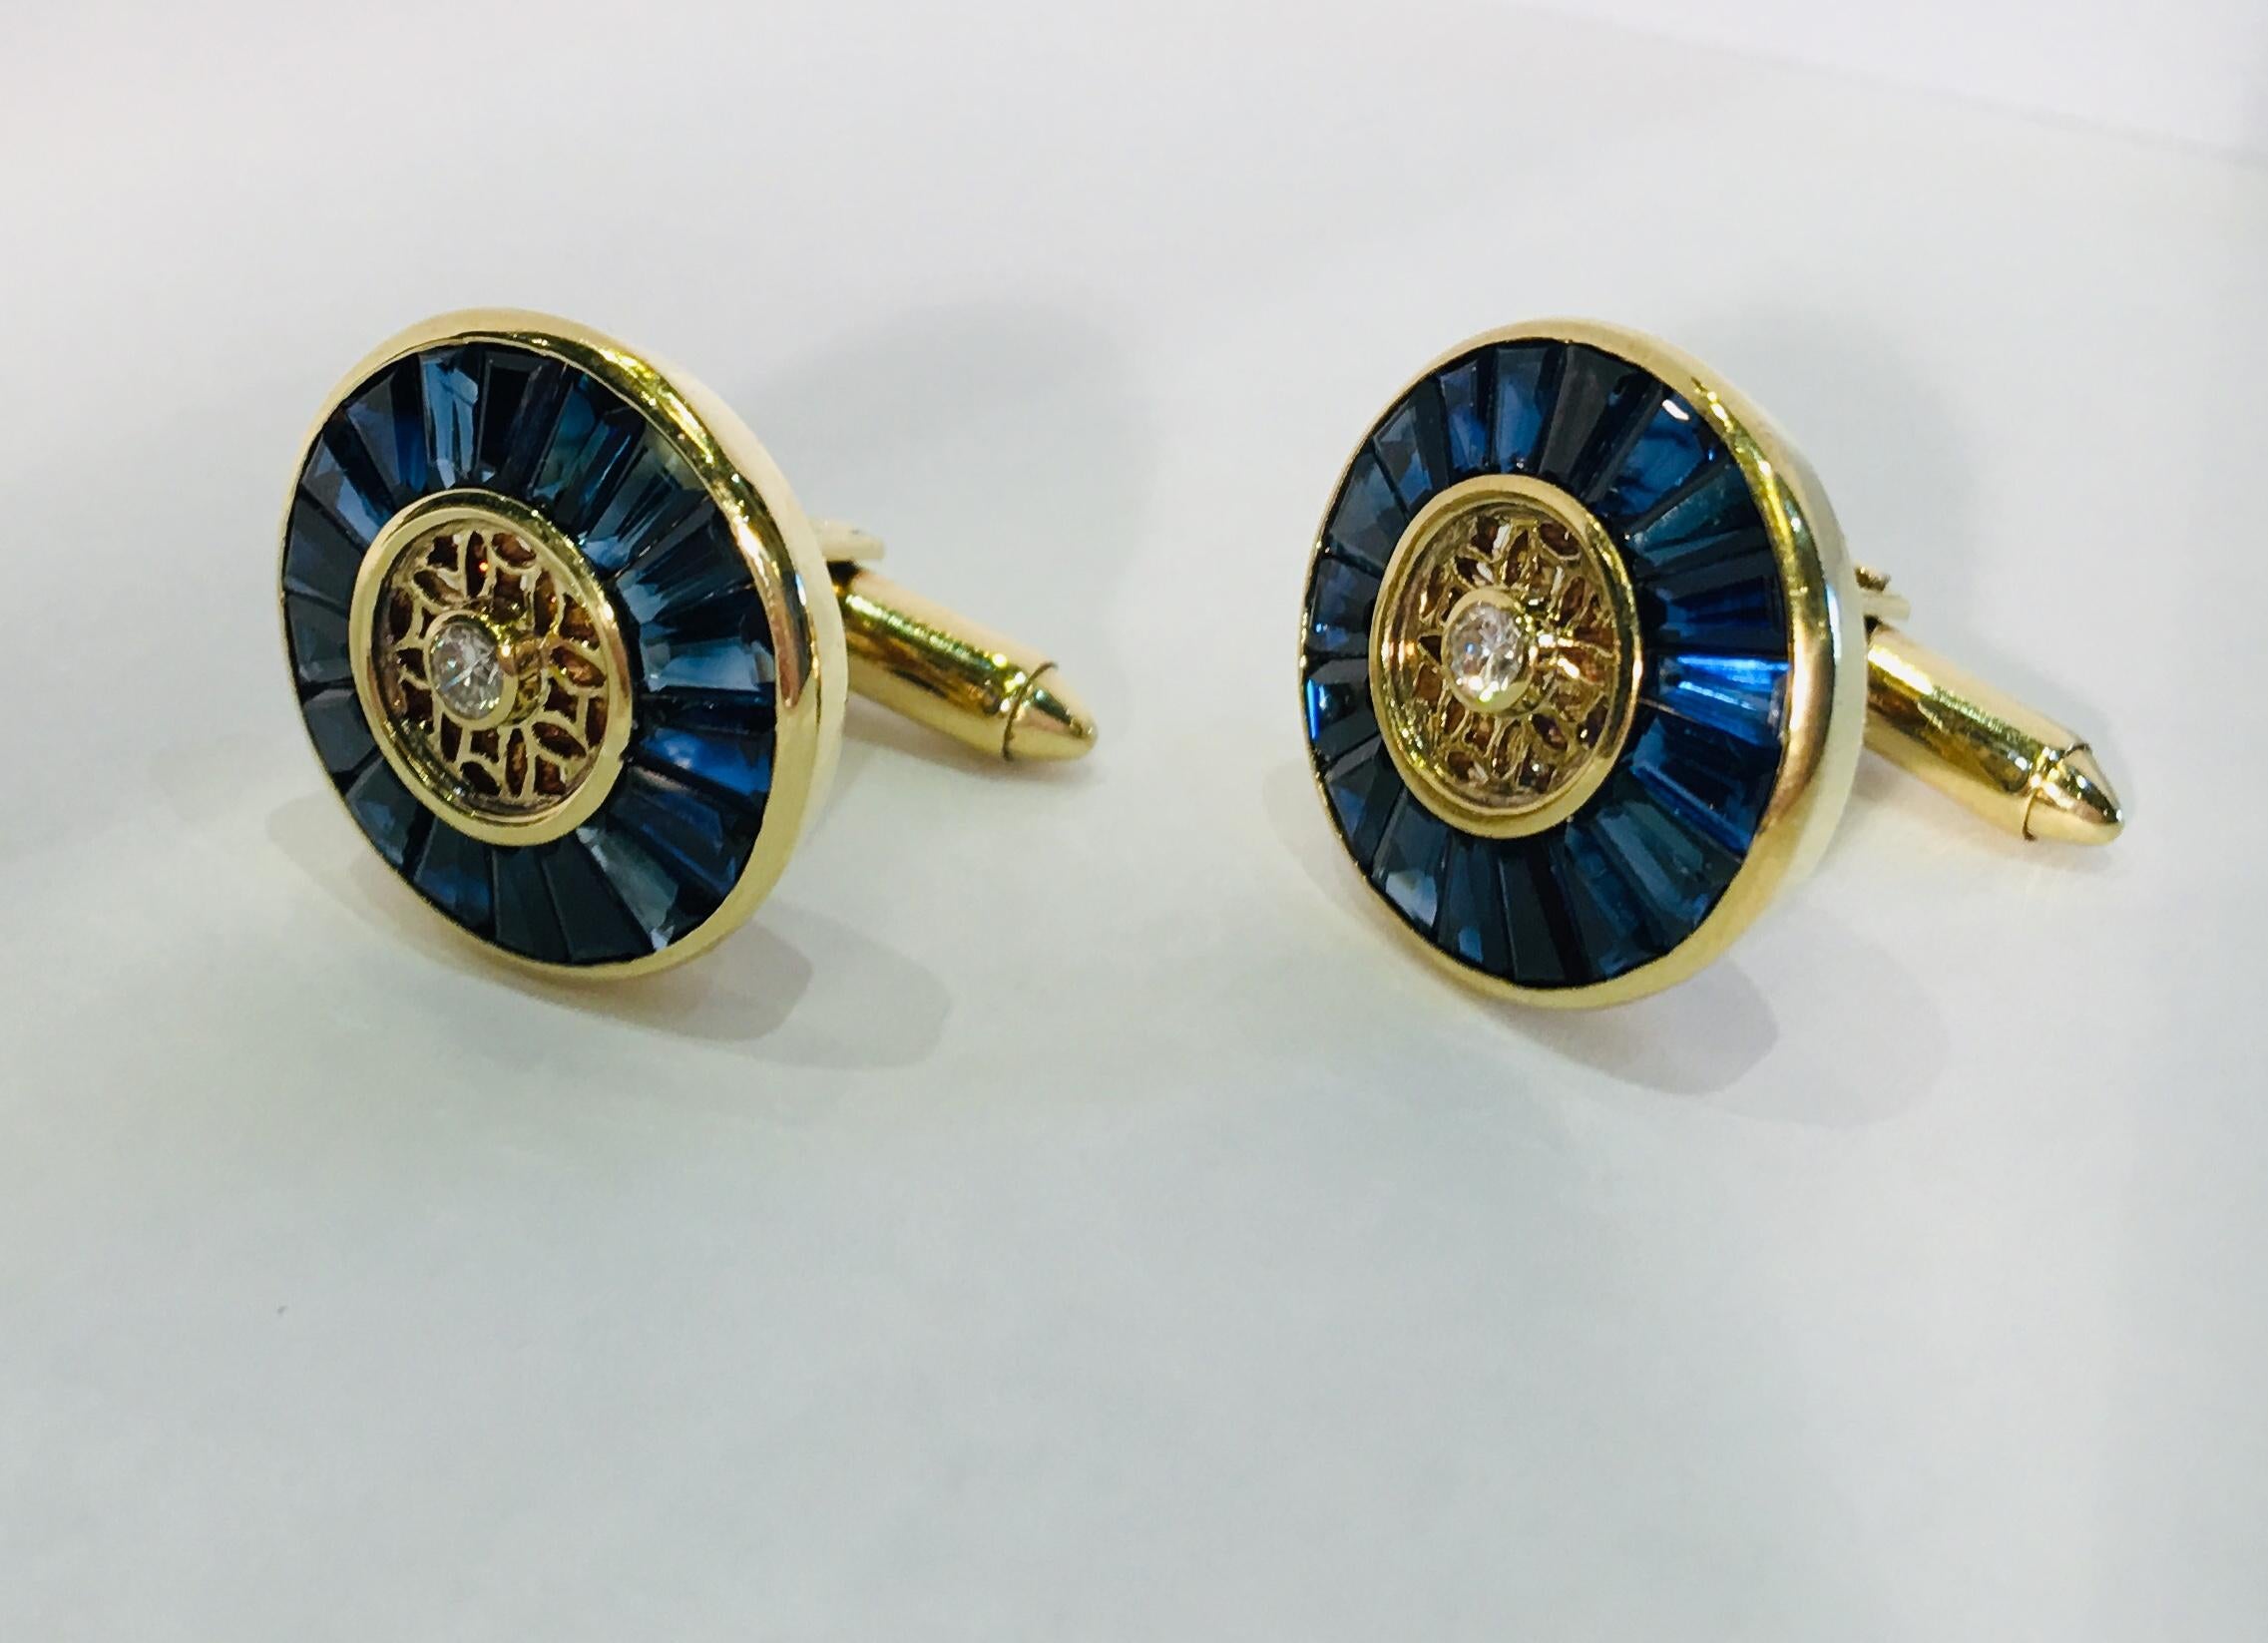 Impeccably styled, very unique 18 karat yellow gold estate cuff links feature vivid blue sapphire baguettes, channel set in a circle, with bezel set round brilliant diamond centers, separated by patterned, openwork fretwork gold. Sapphire is the